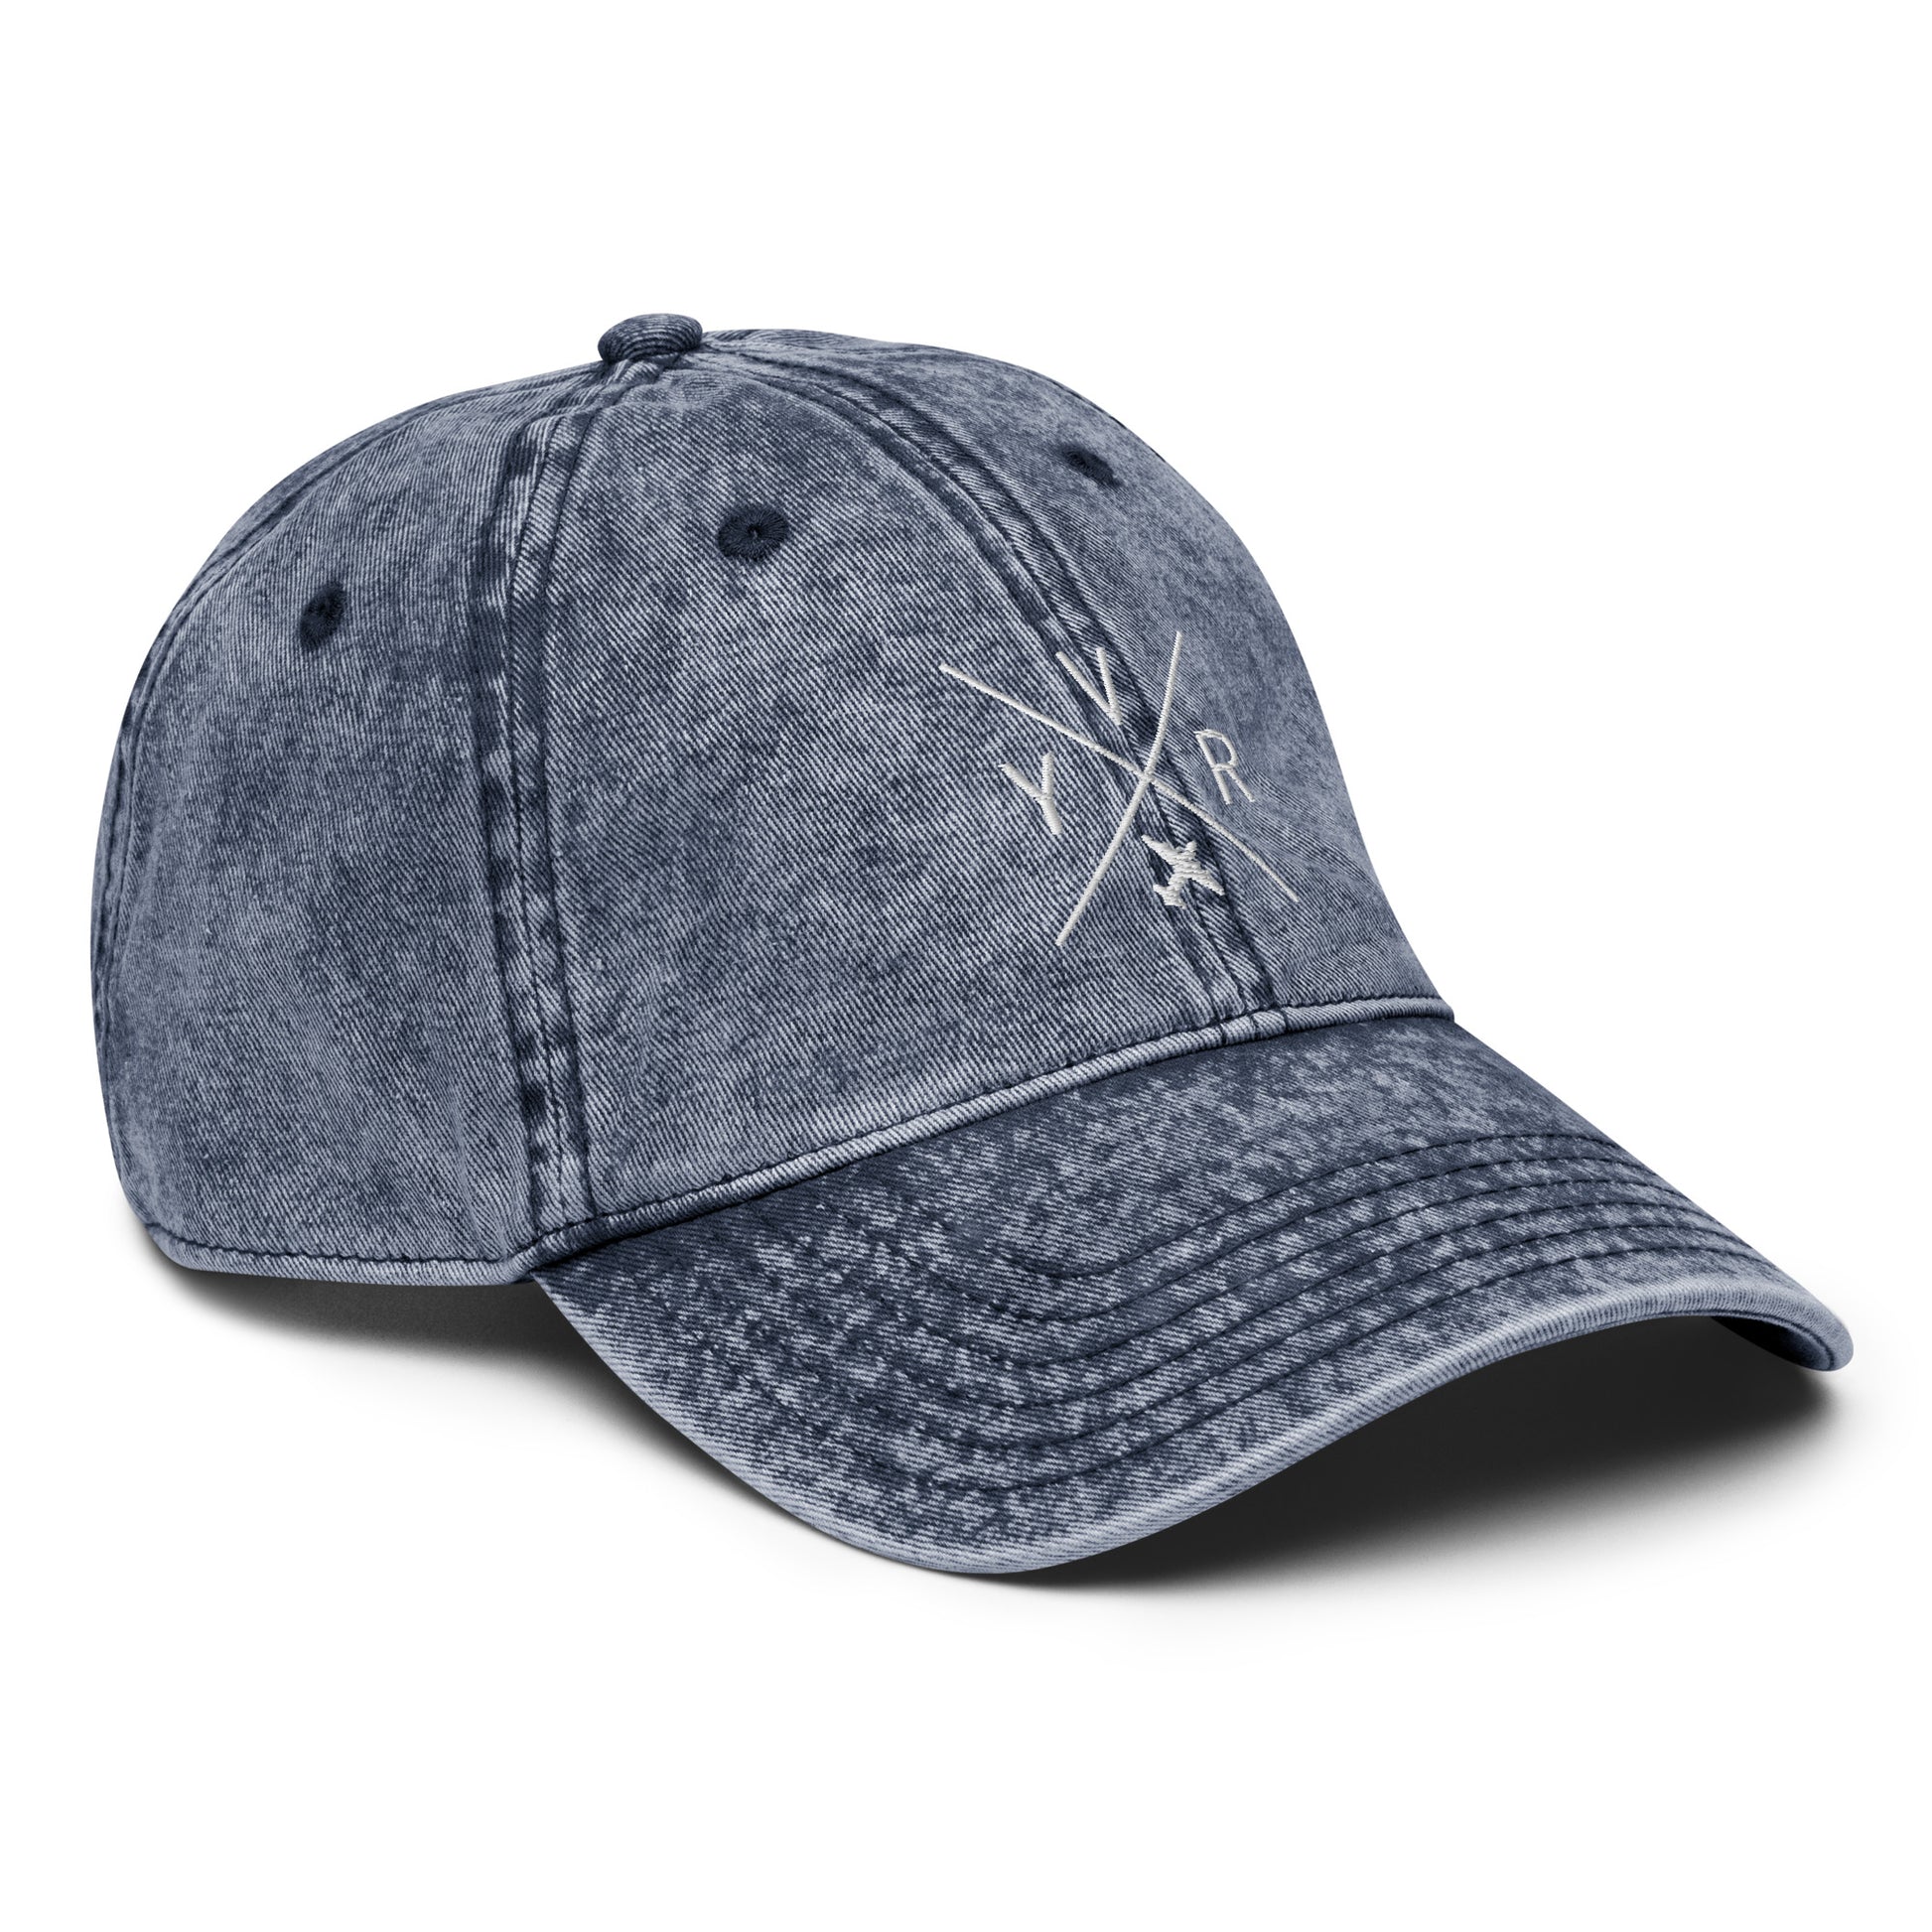 Crossed-X Cotton Twill Cap - White • YVR Vancouver • YHM Designs - Image 21